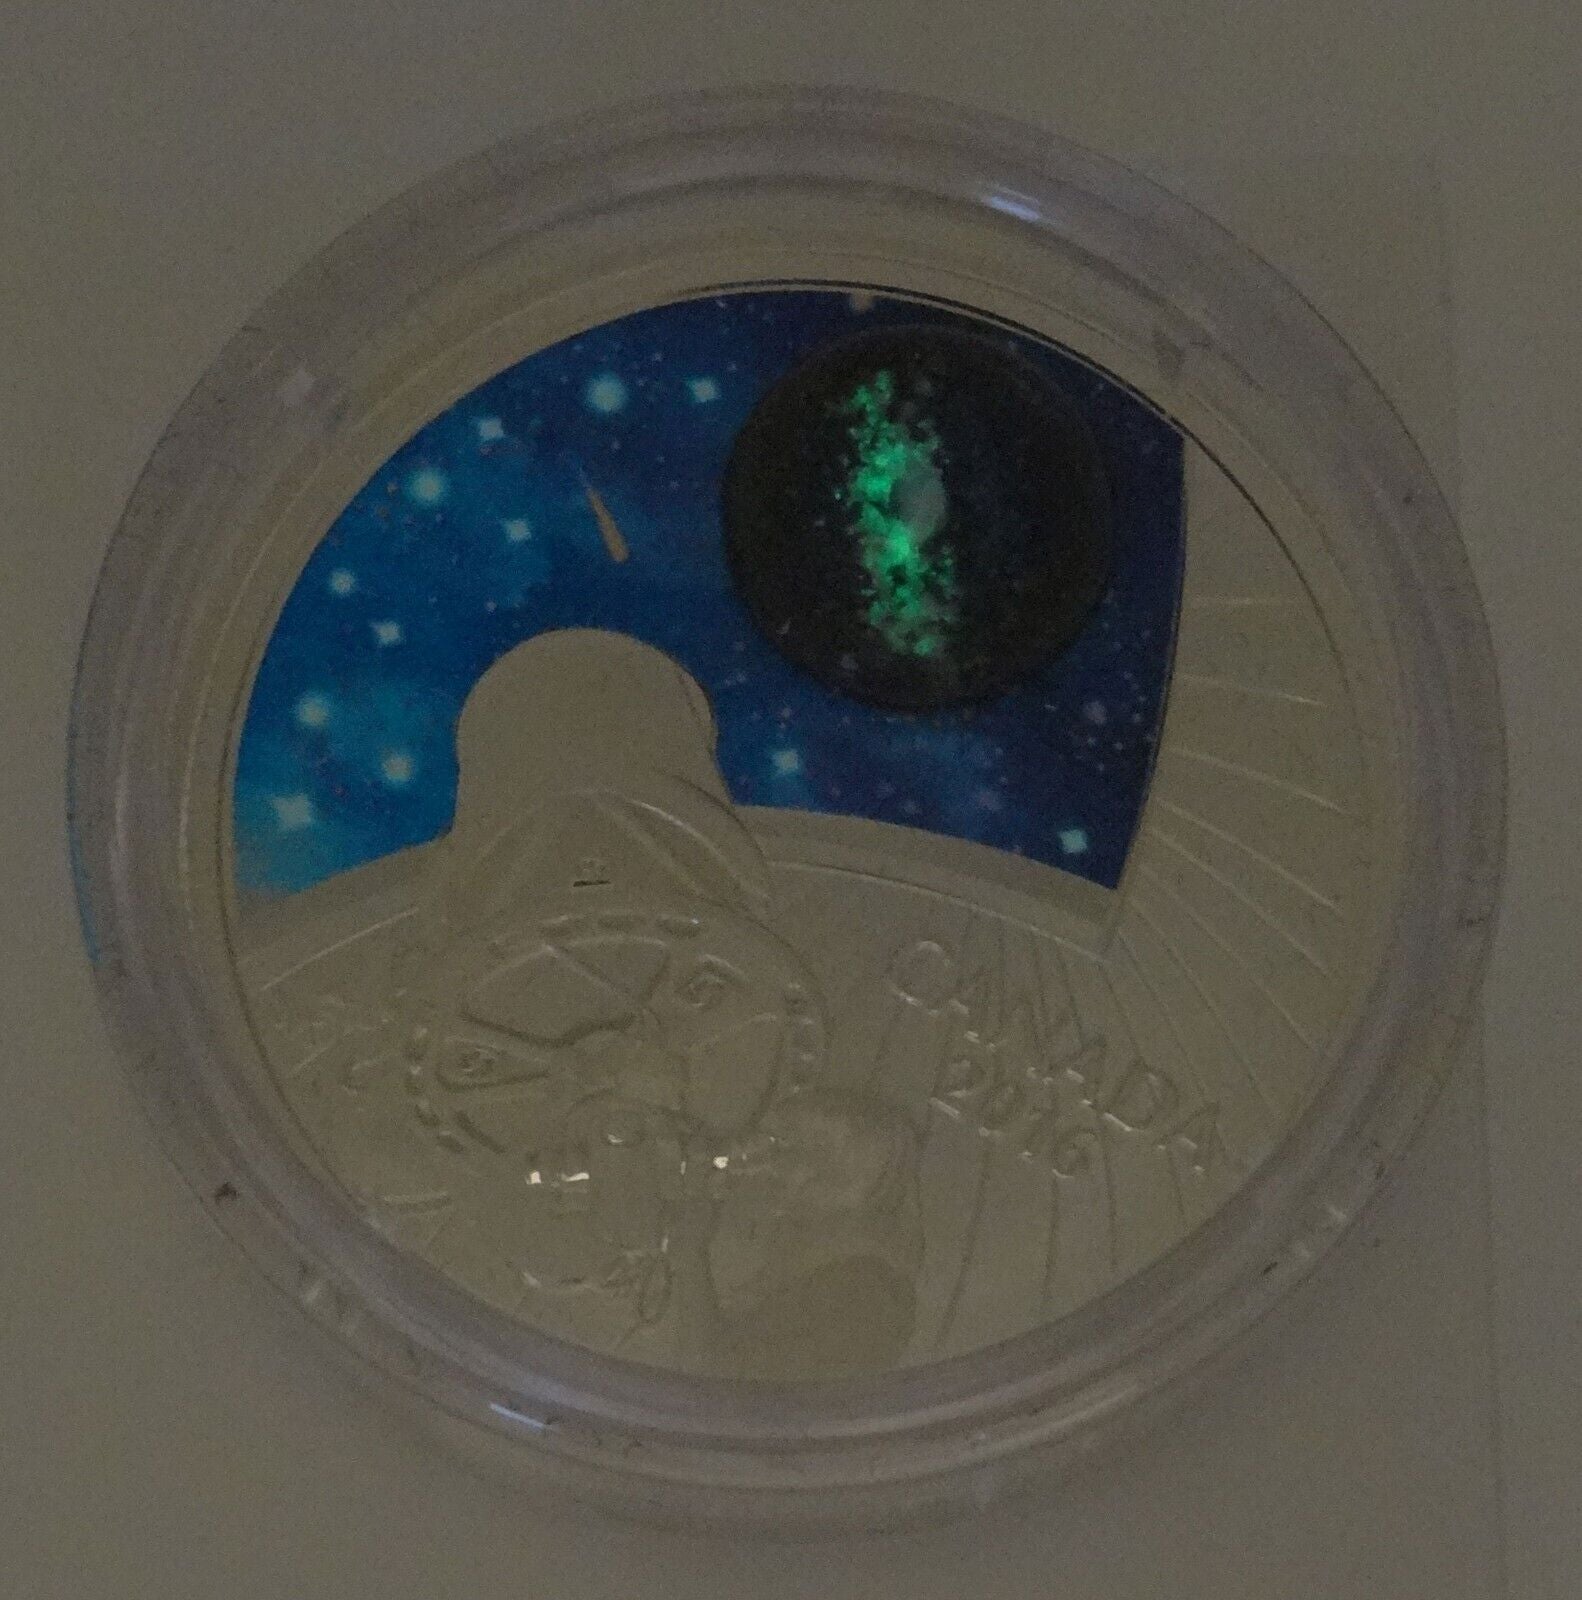 1 Oz Silver Coin 2016 $20 Canada The Universe Glow in the Dark Glass with Opal-classypw.com-2